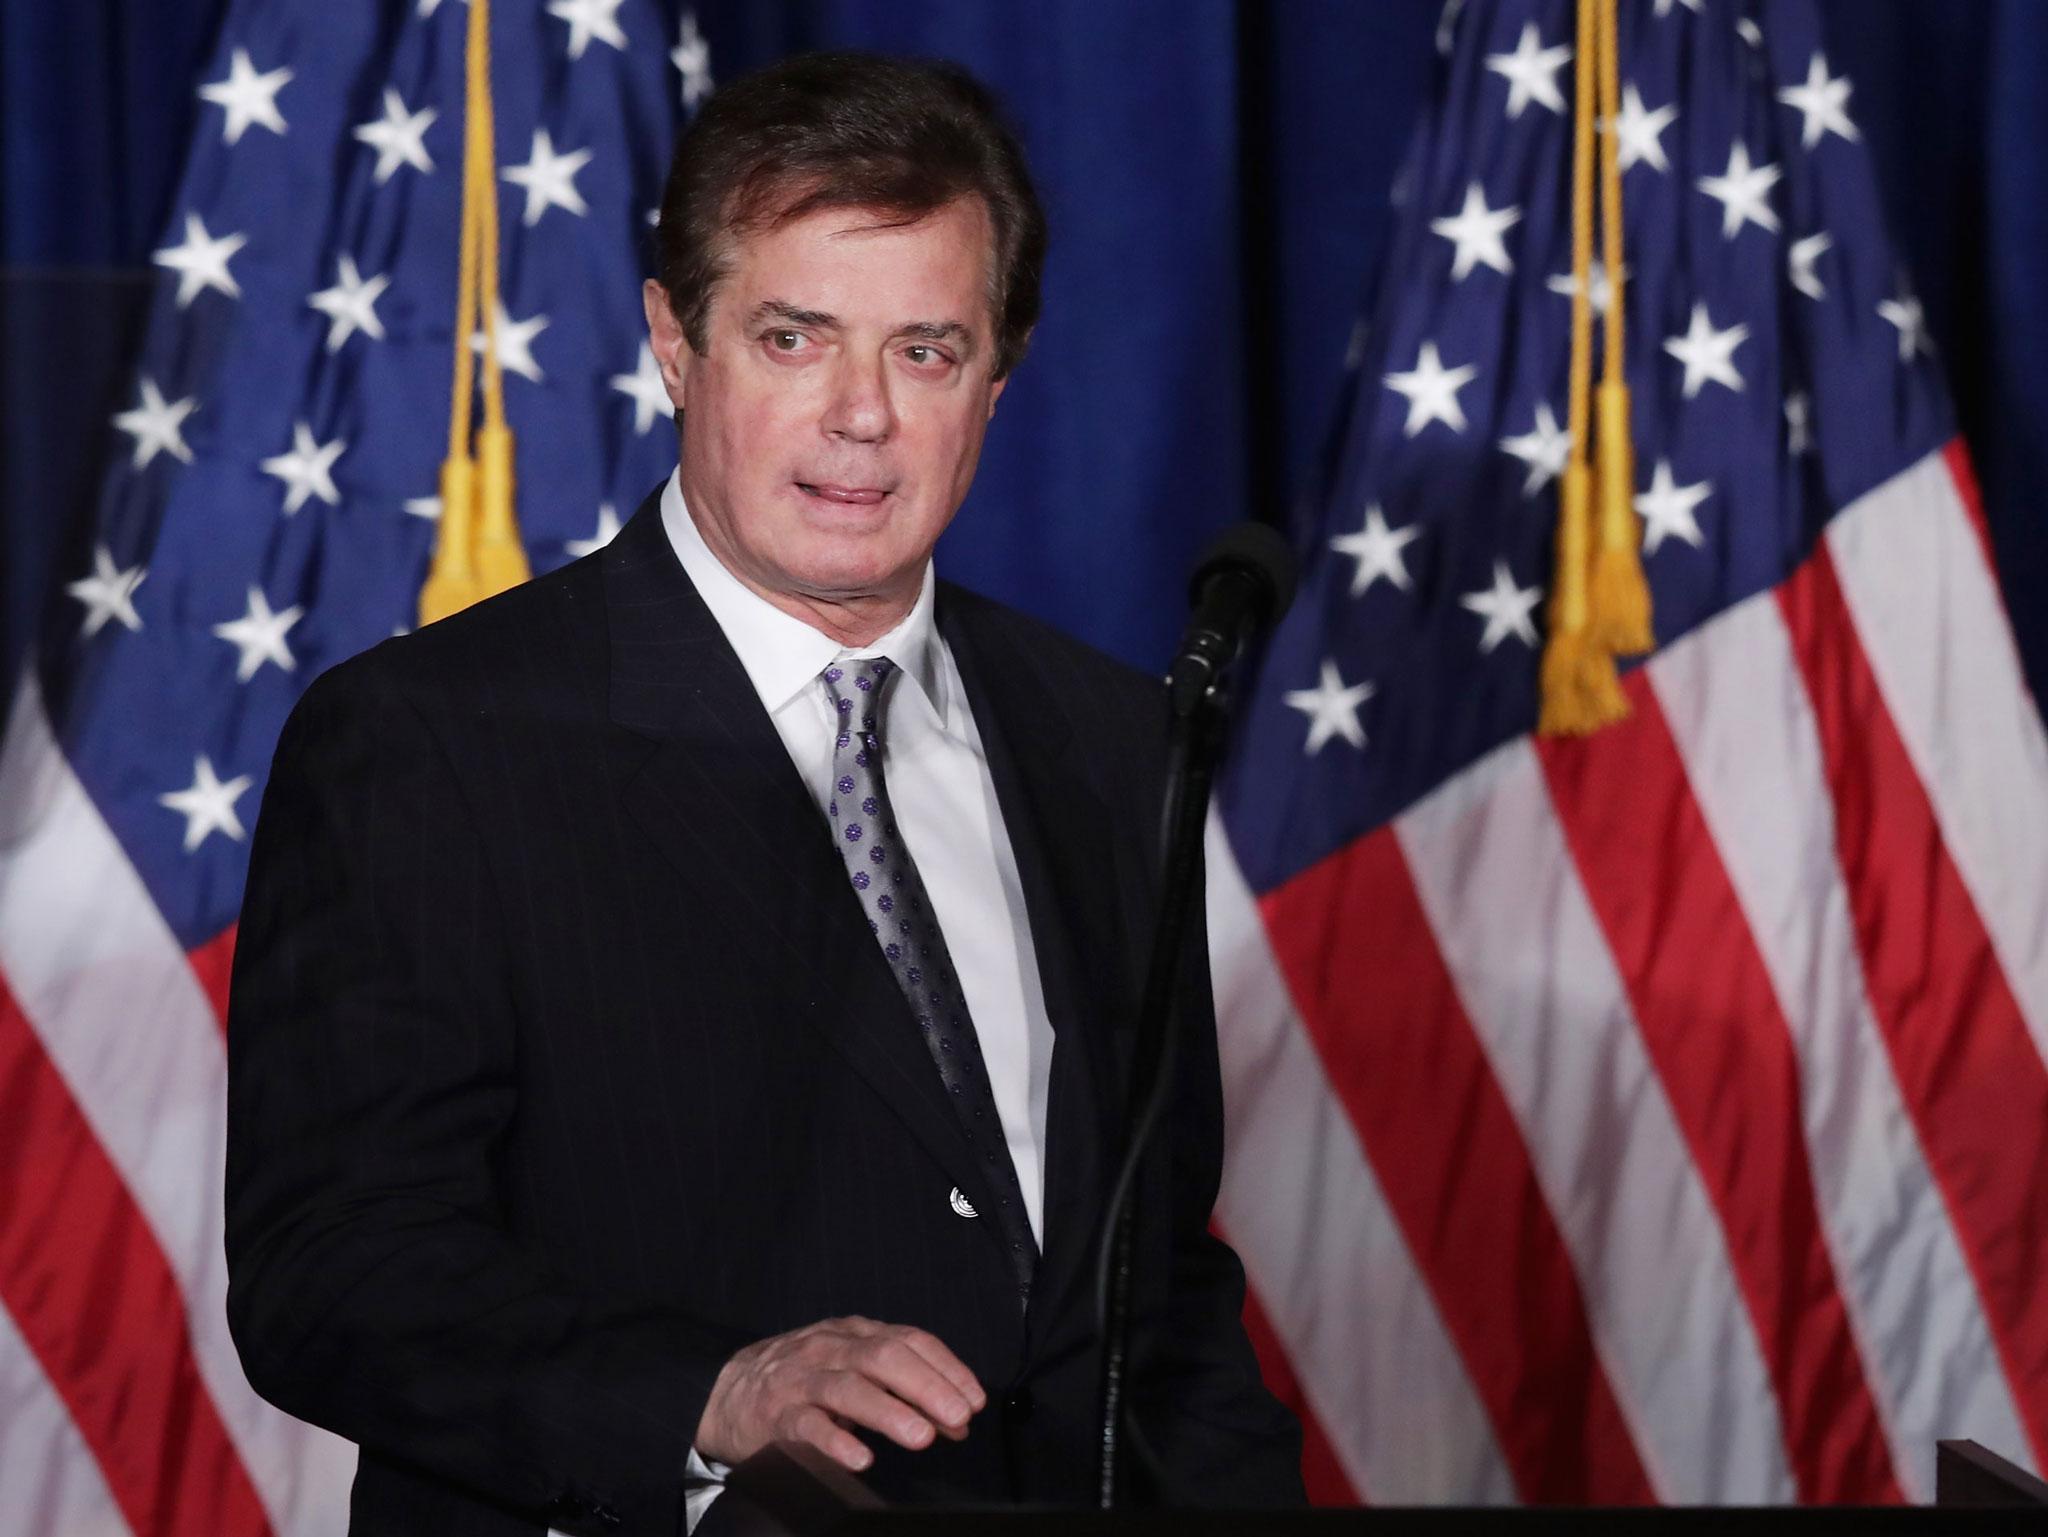 Paul Manafort has insisted he never represented Russian political interests